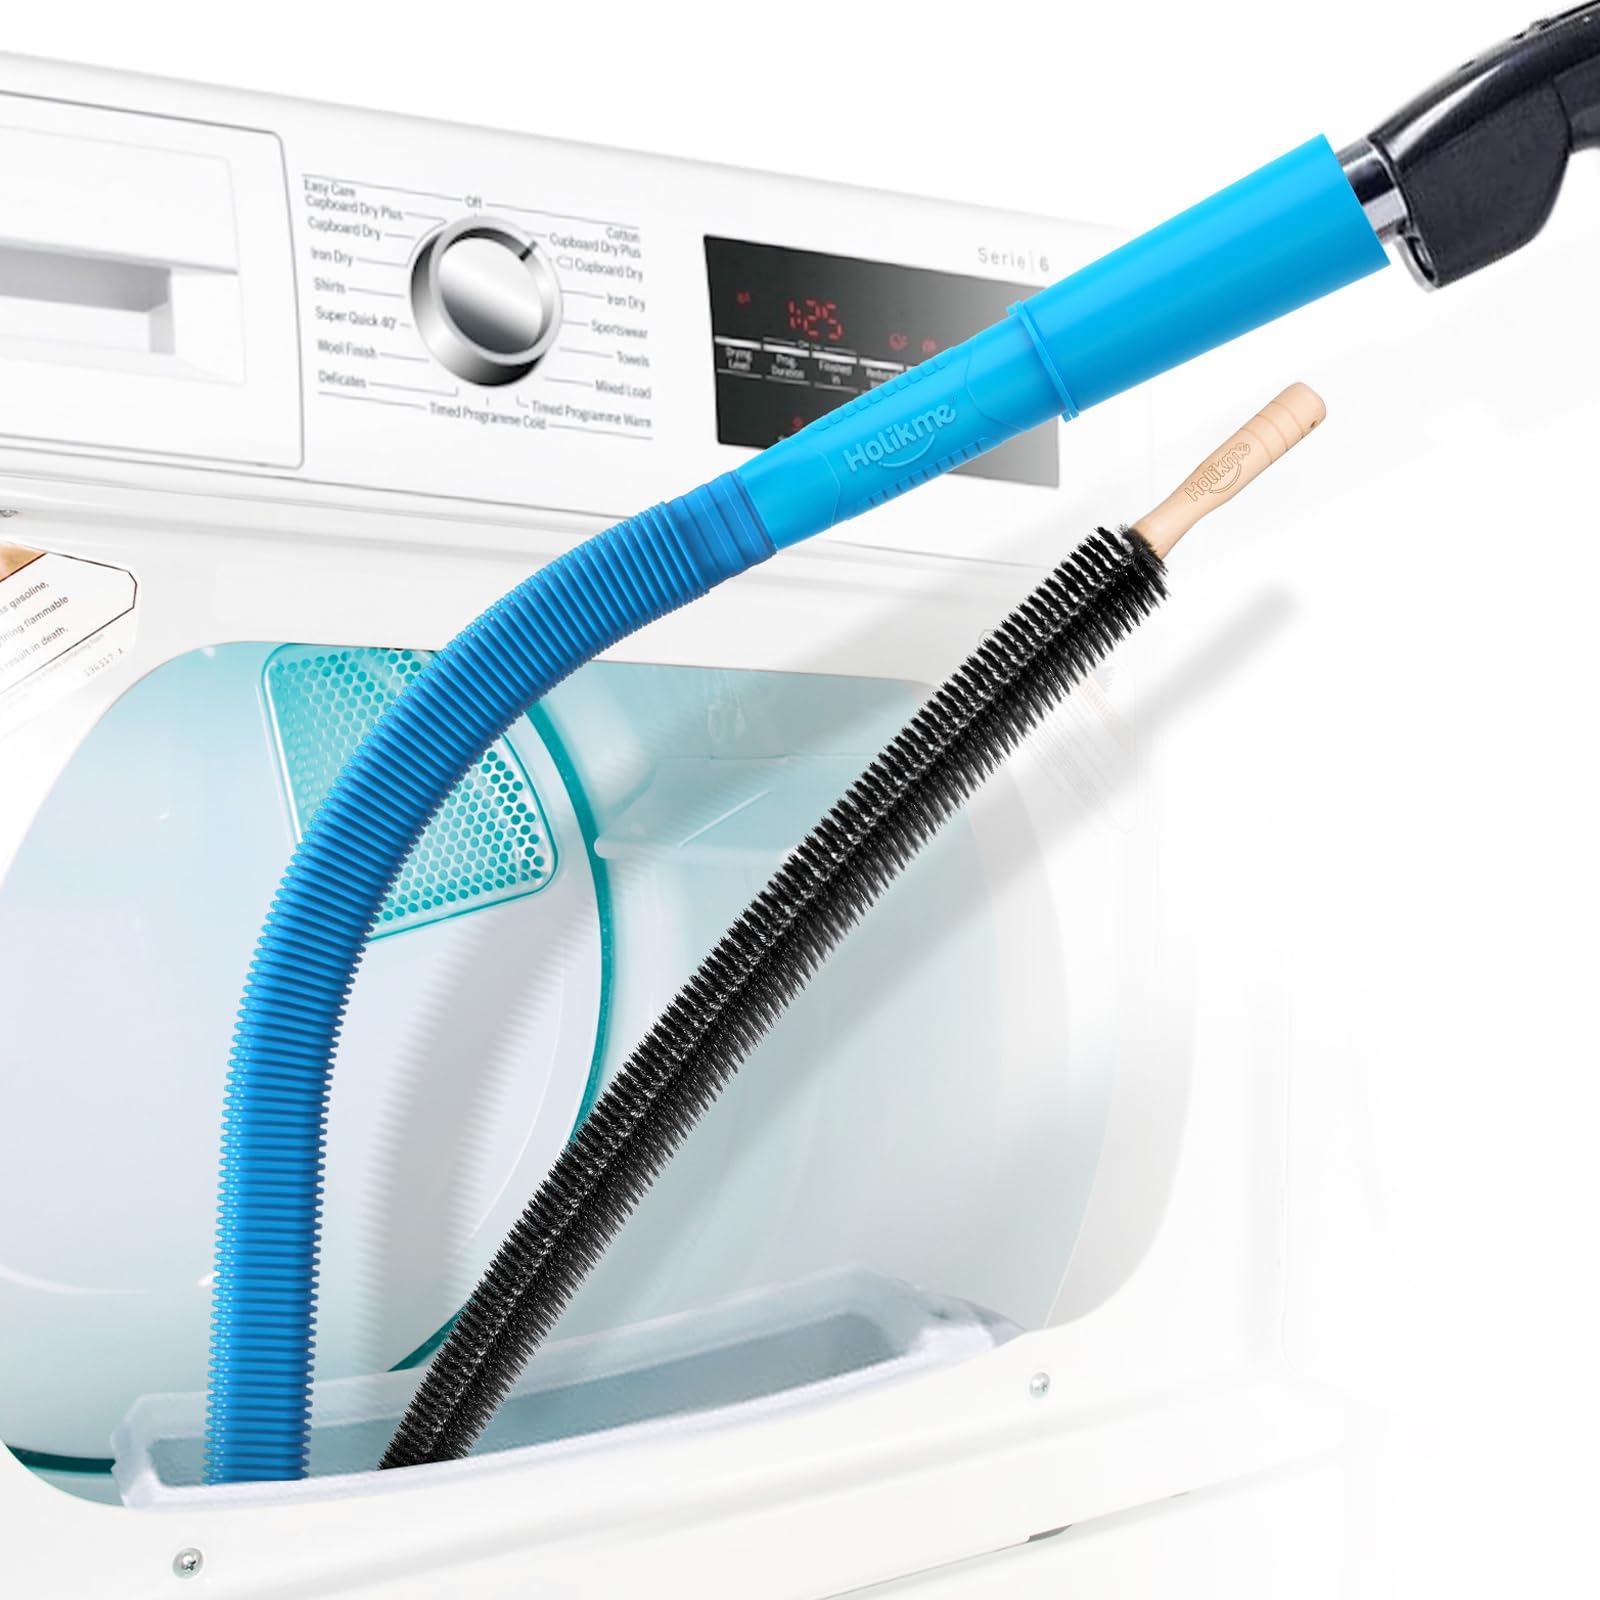 11 Incredible Dryer Cleaning Kit For 2023